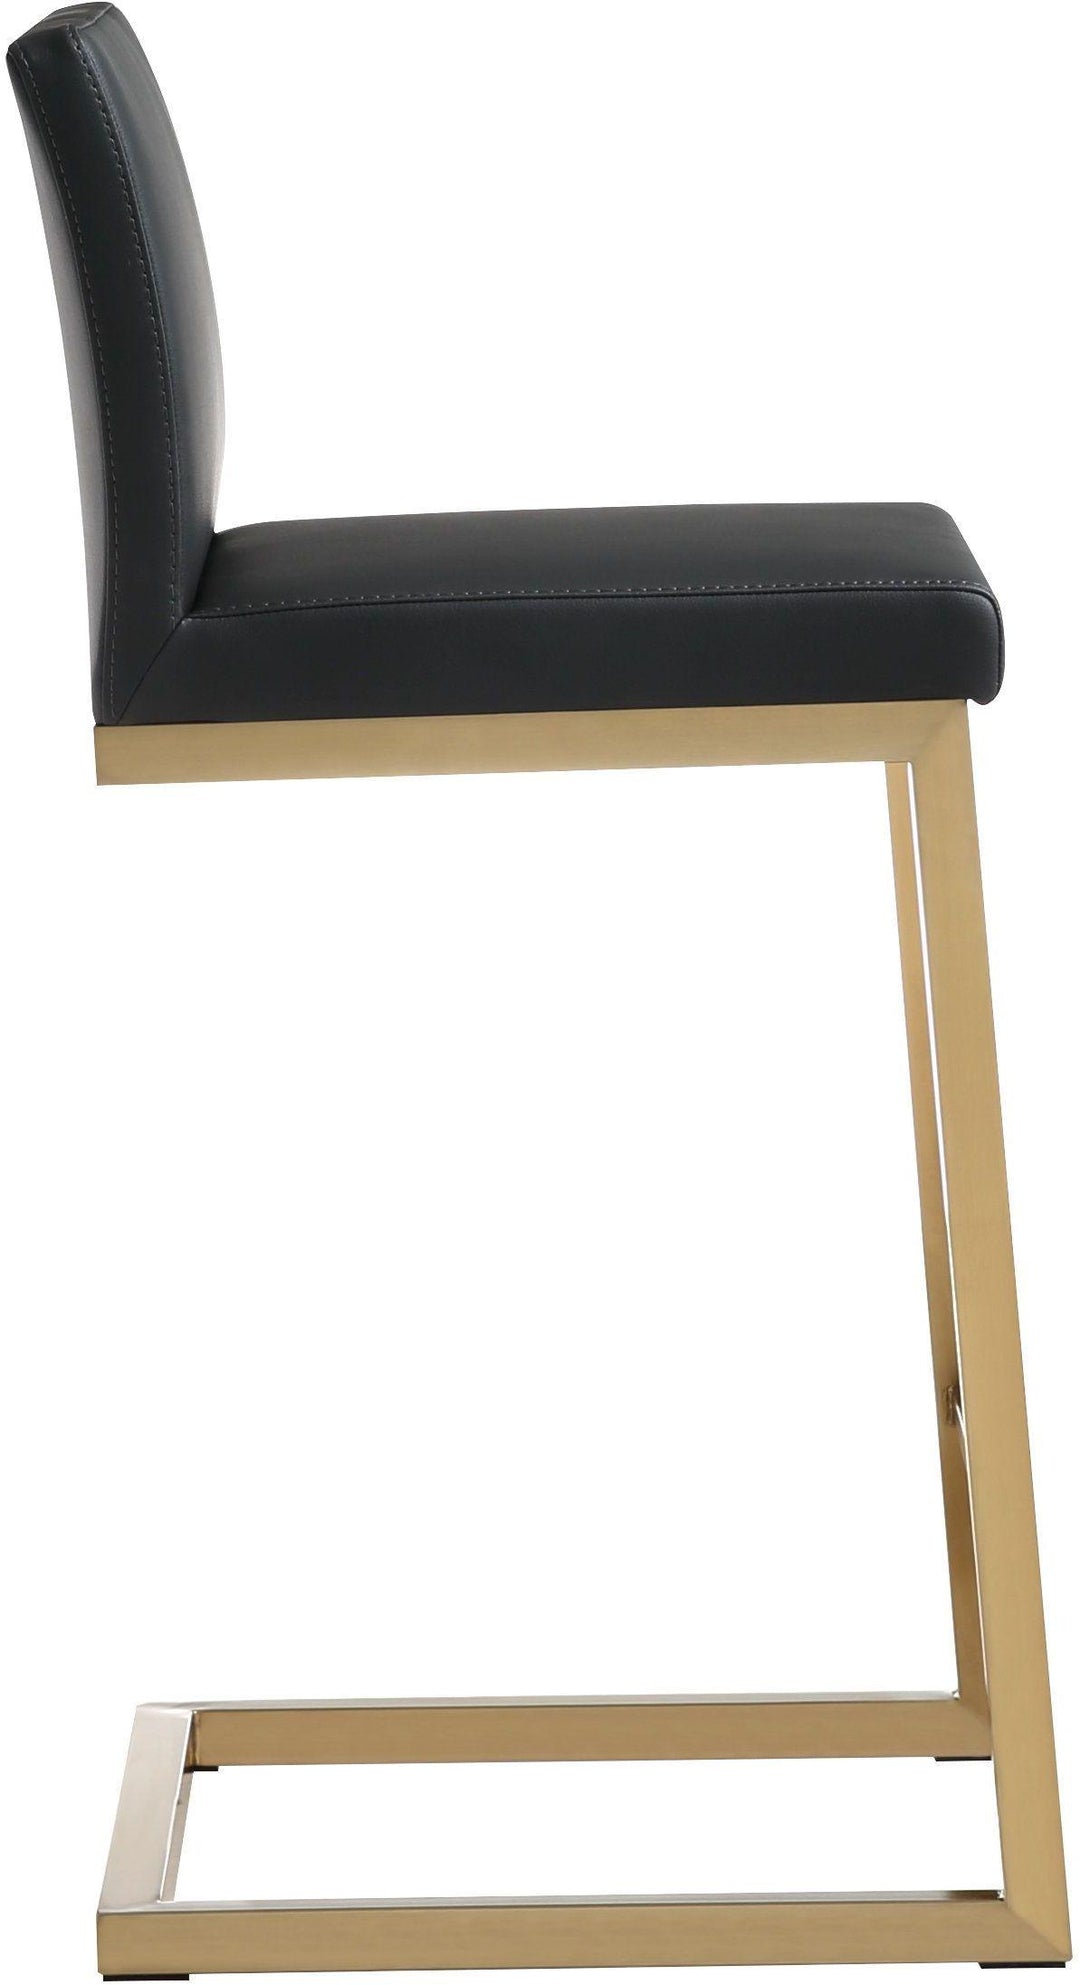 American Home Furniture | TOV Furniture - Parma Black Gold Steel Counter Stool (Set of 2)